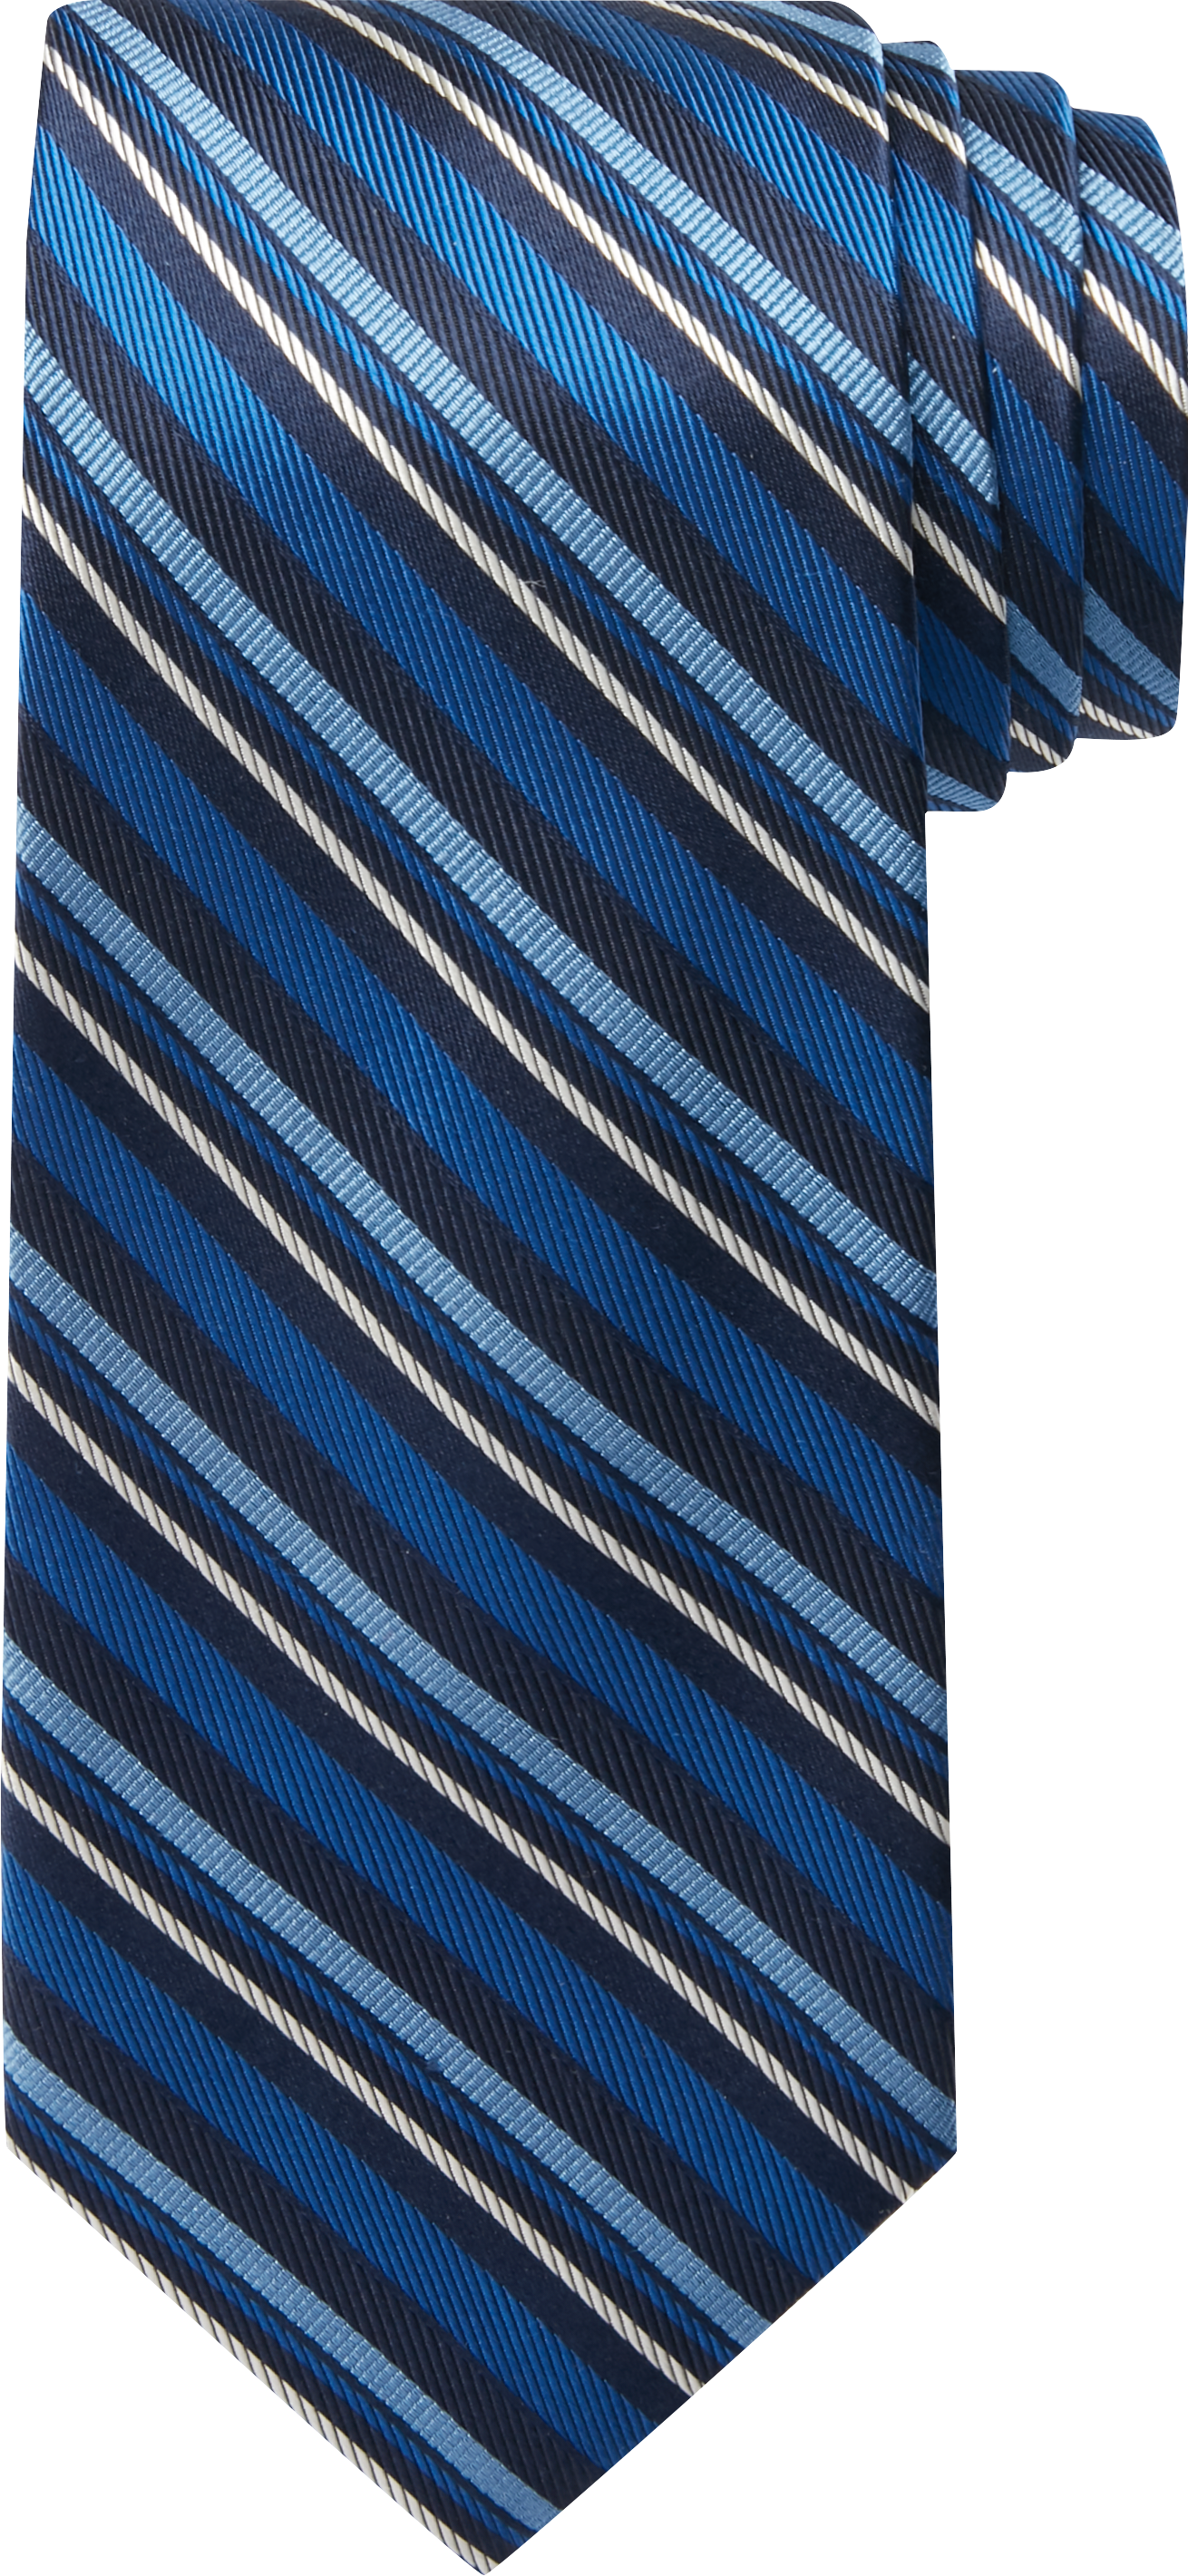 Reserve Collection Multi-Stripe Tie - Long CLEARANCE - All Clearance ...